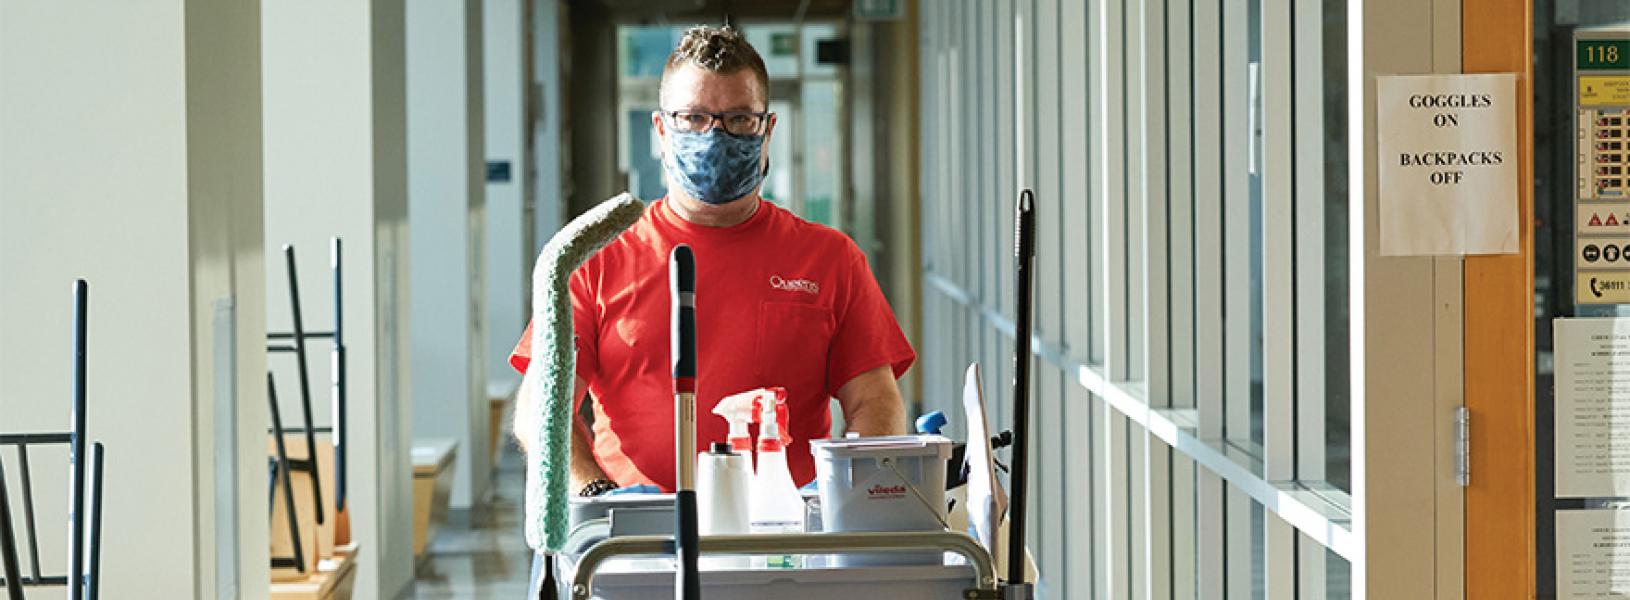 Facility services worker pushes a cart through Chernoff Hall while wearing a medical mask.